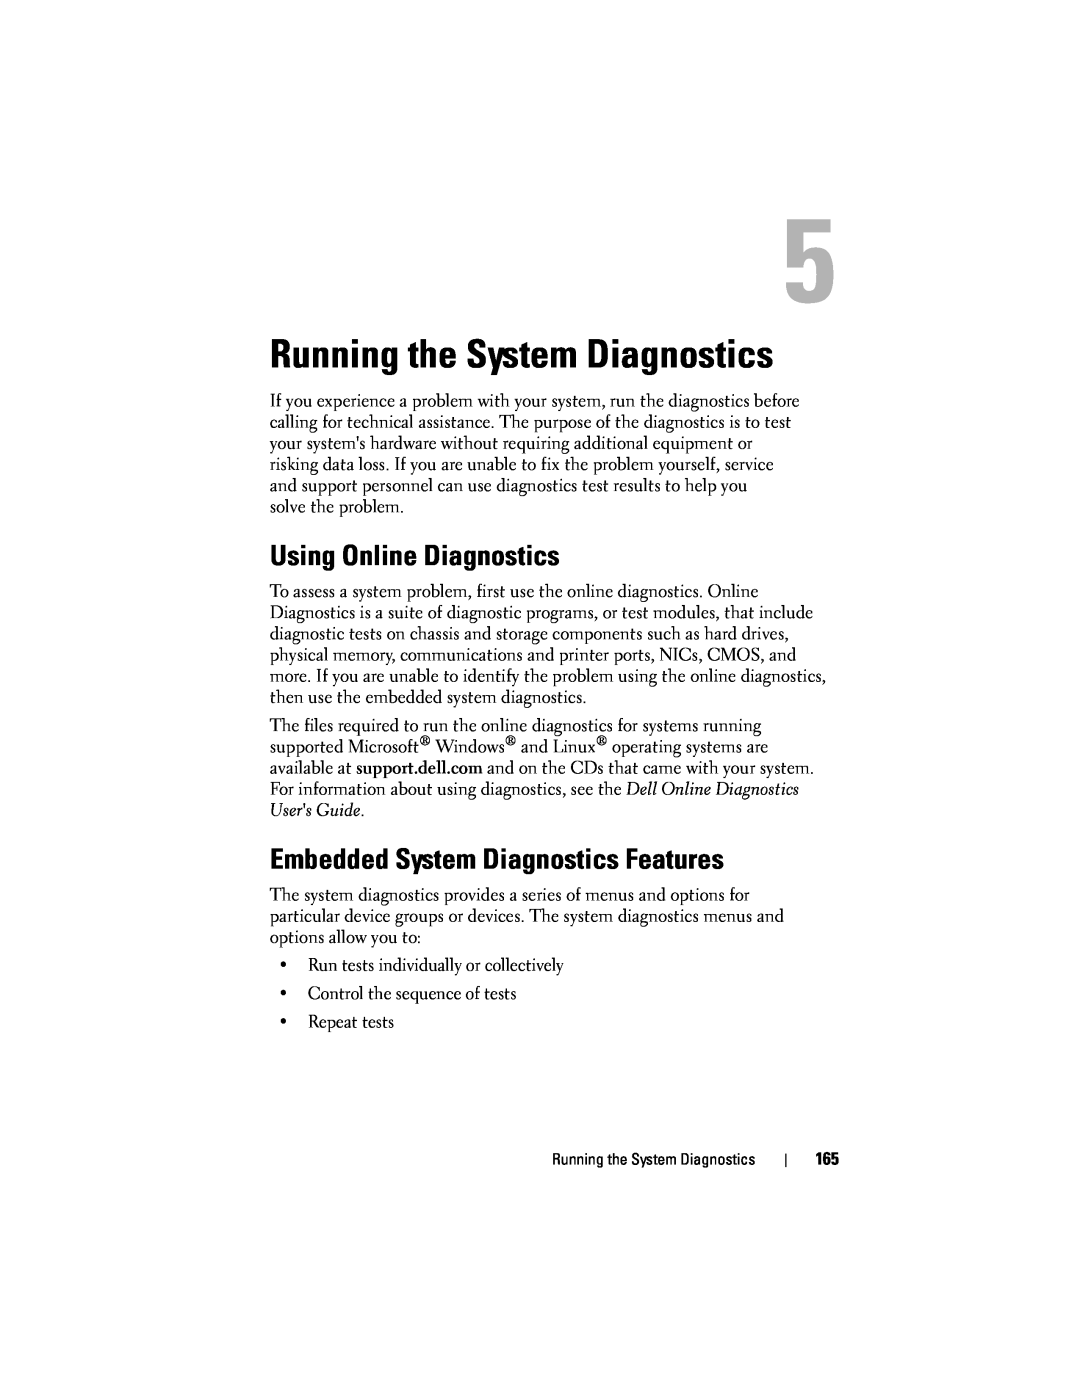 Dell T310 owner manual Running the System Diagnostics, Using Online Diagnostics, Embedded System Diagnostics Features 